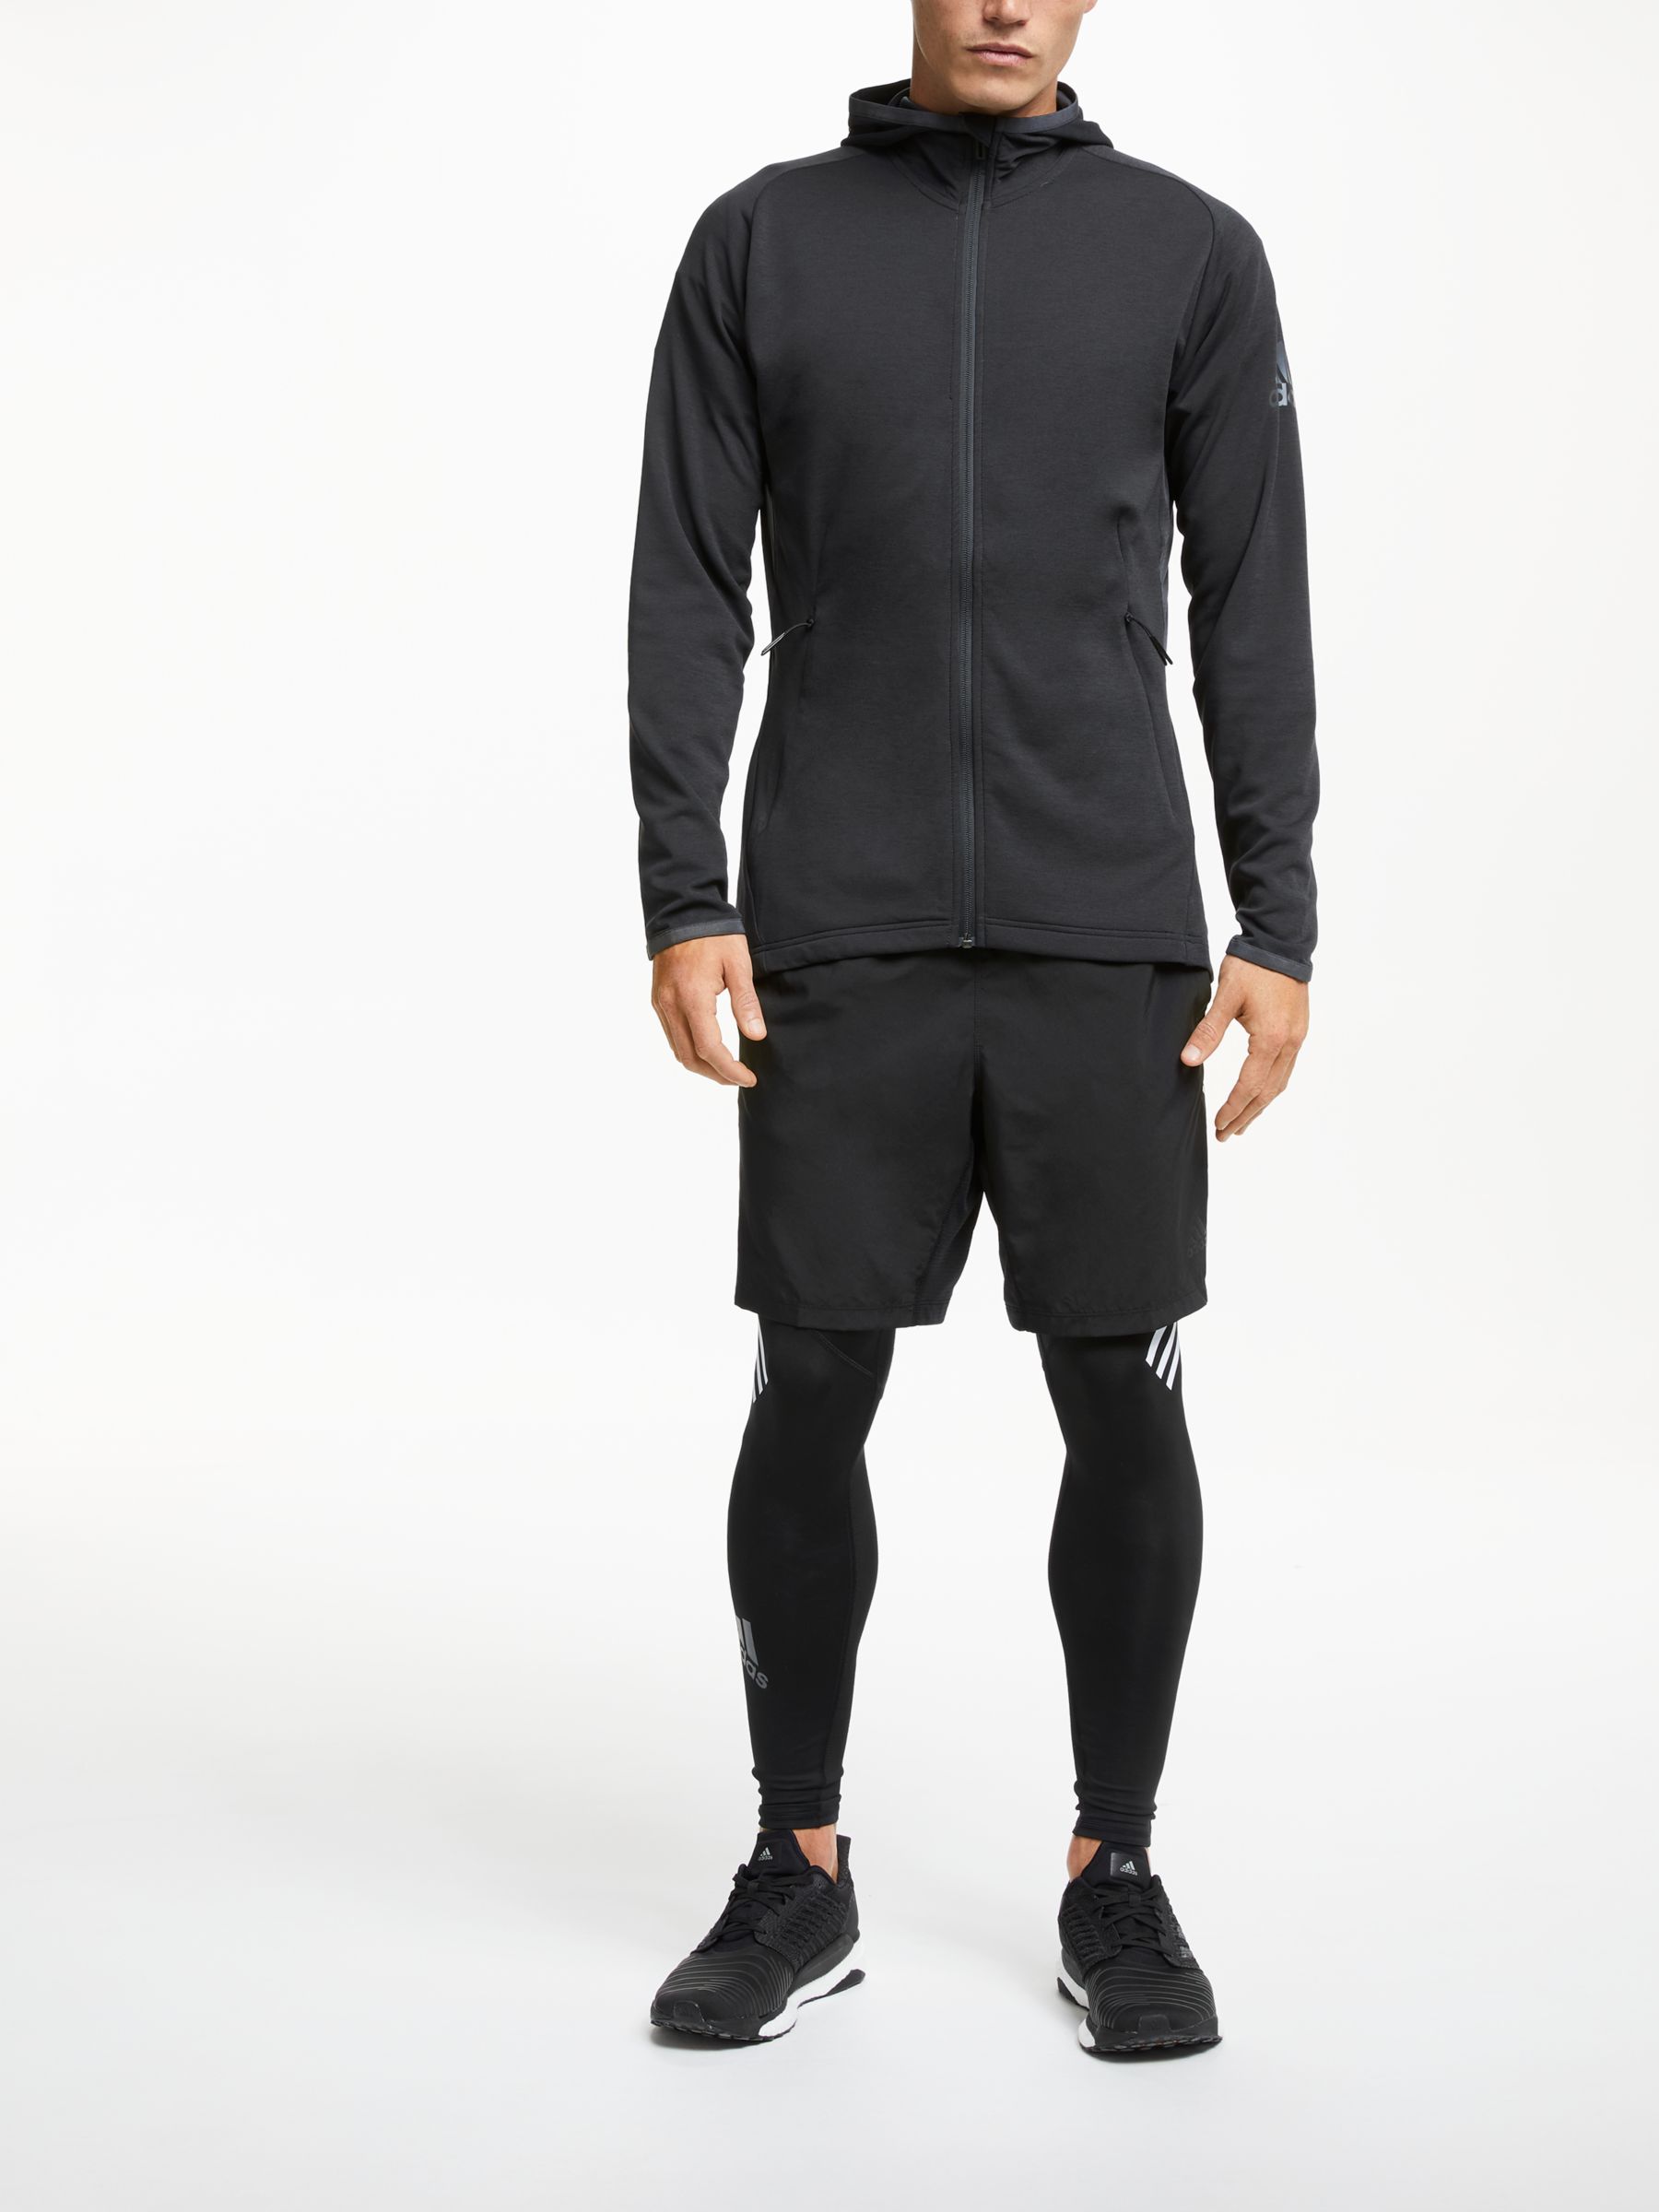 climacool workout hoodie